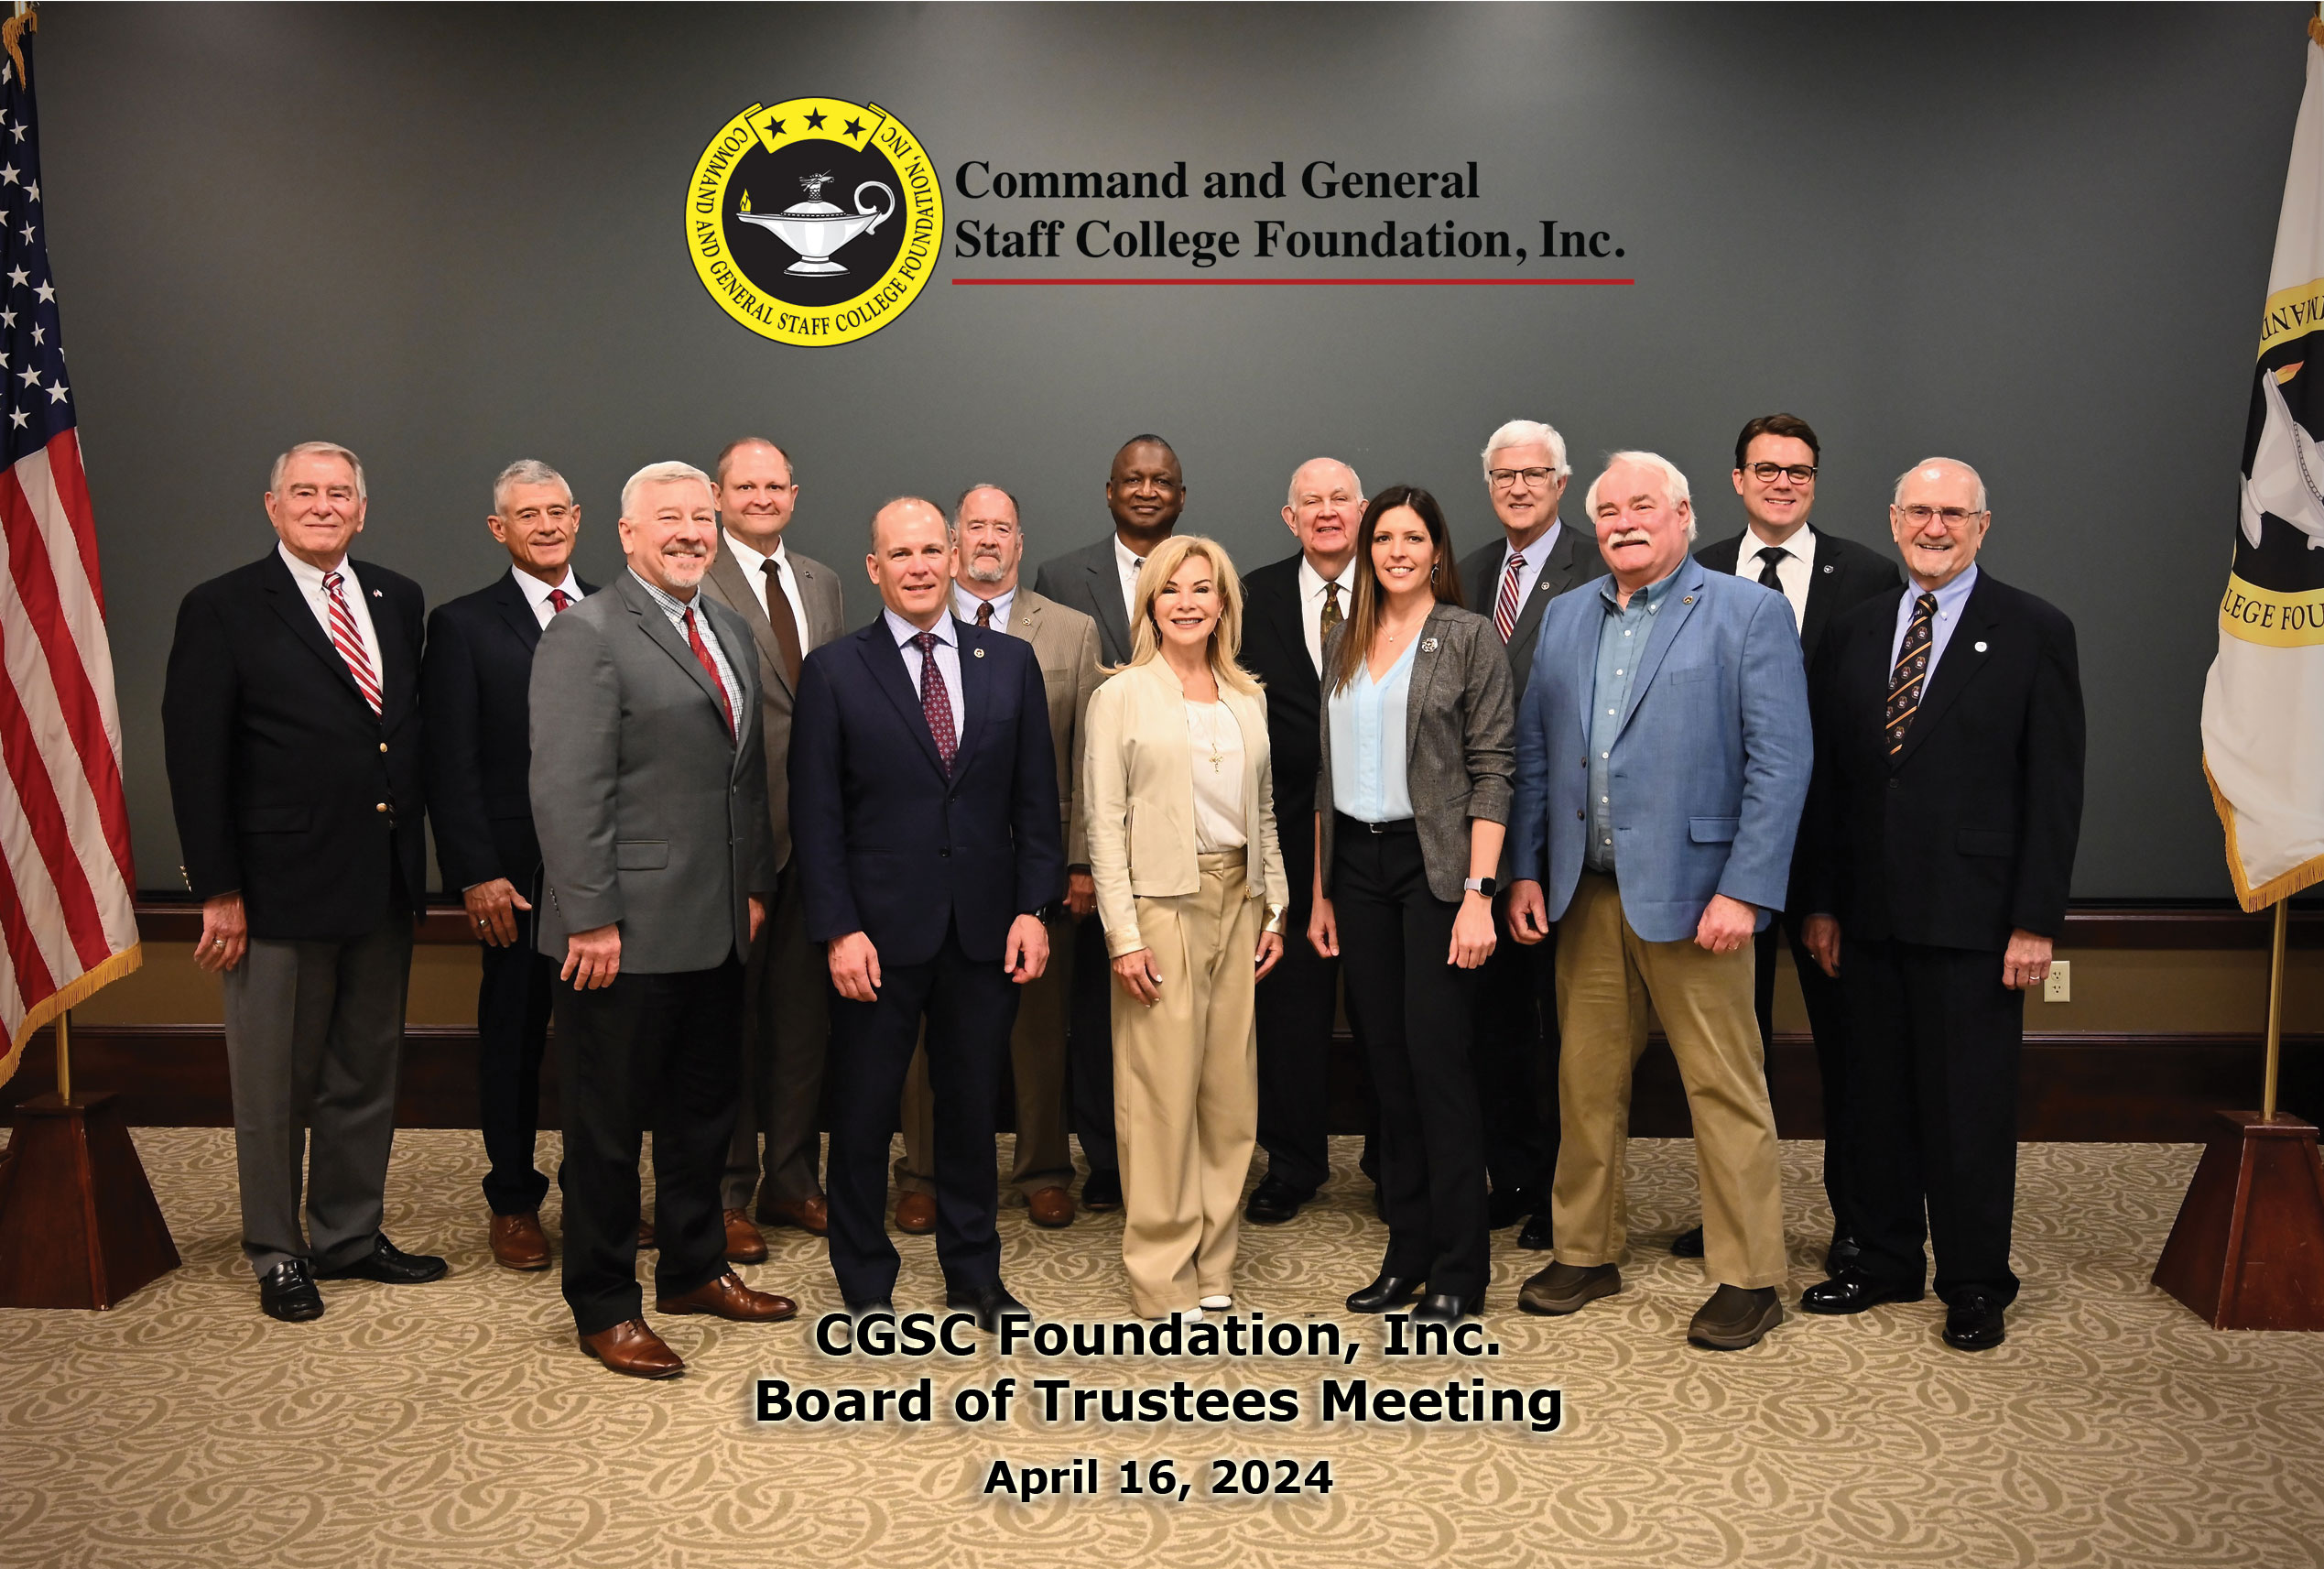 CGSC Foundation Board of Trustees group photo taken on April 16, 2024, in the Arnold Conference room of the Lewis and Clark Center on Fort Leavenworth, Kansas.